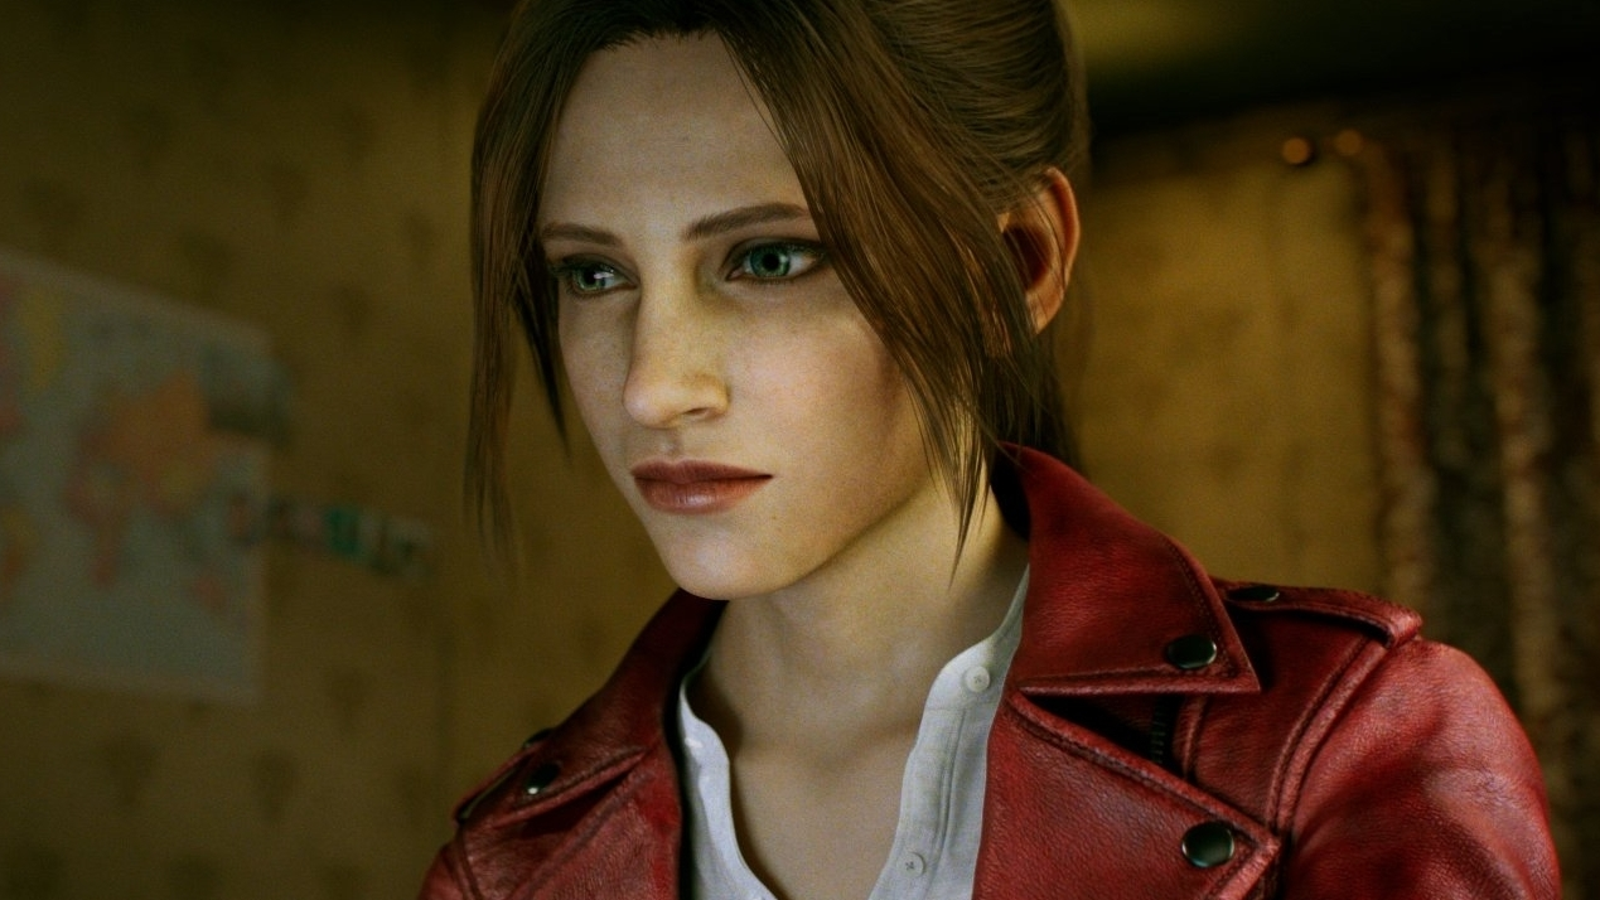 Resident Evil: Every Game Claire Redfield Appears In